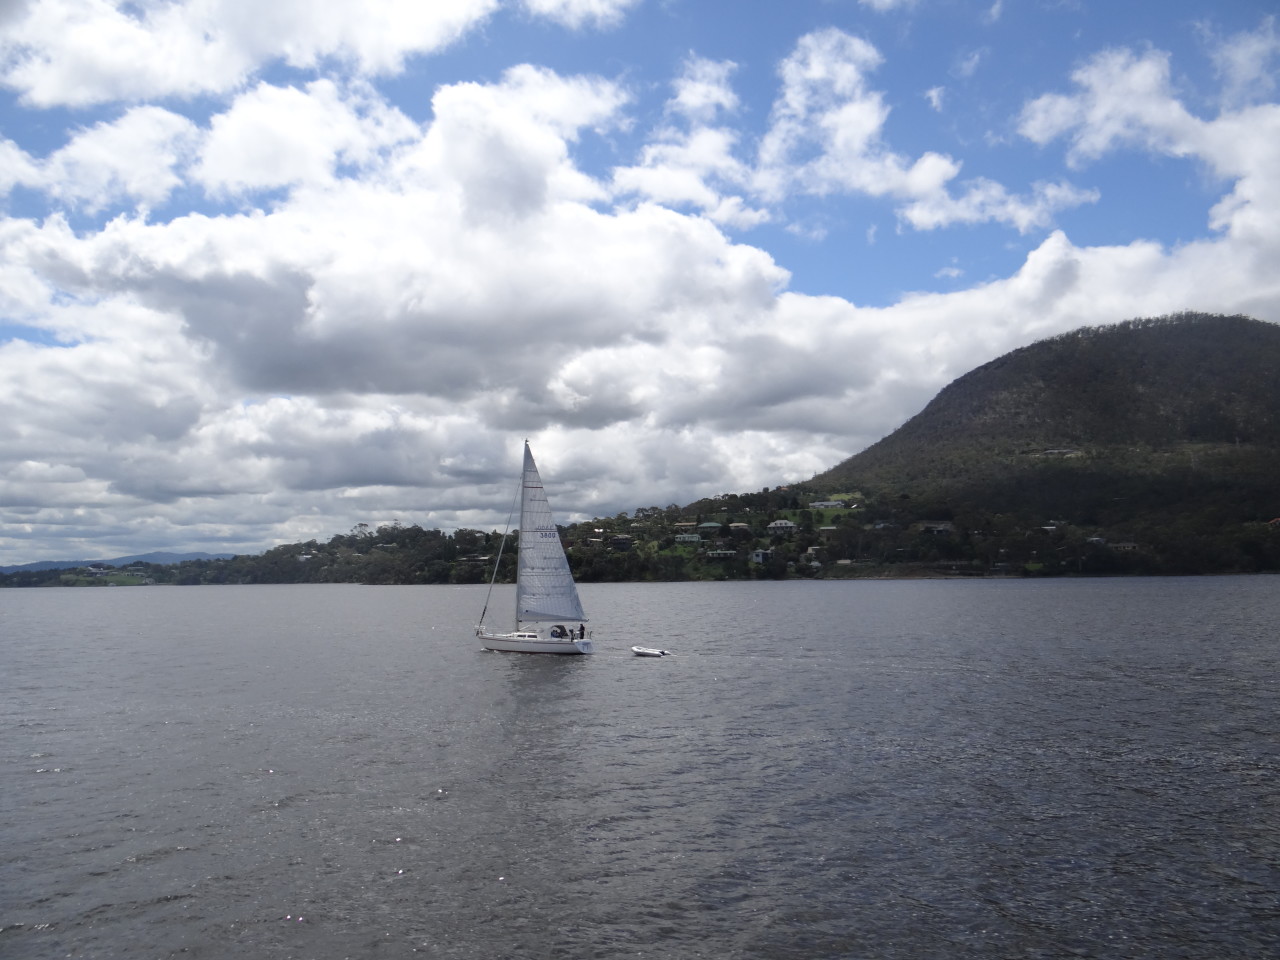 Sailing in Hobart, Tasmania on water with blue skies and puffy clouds